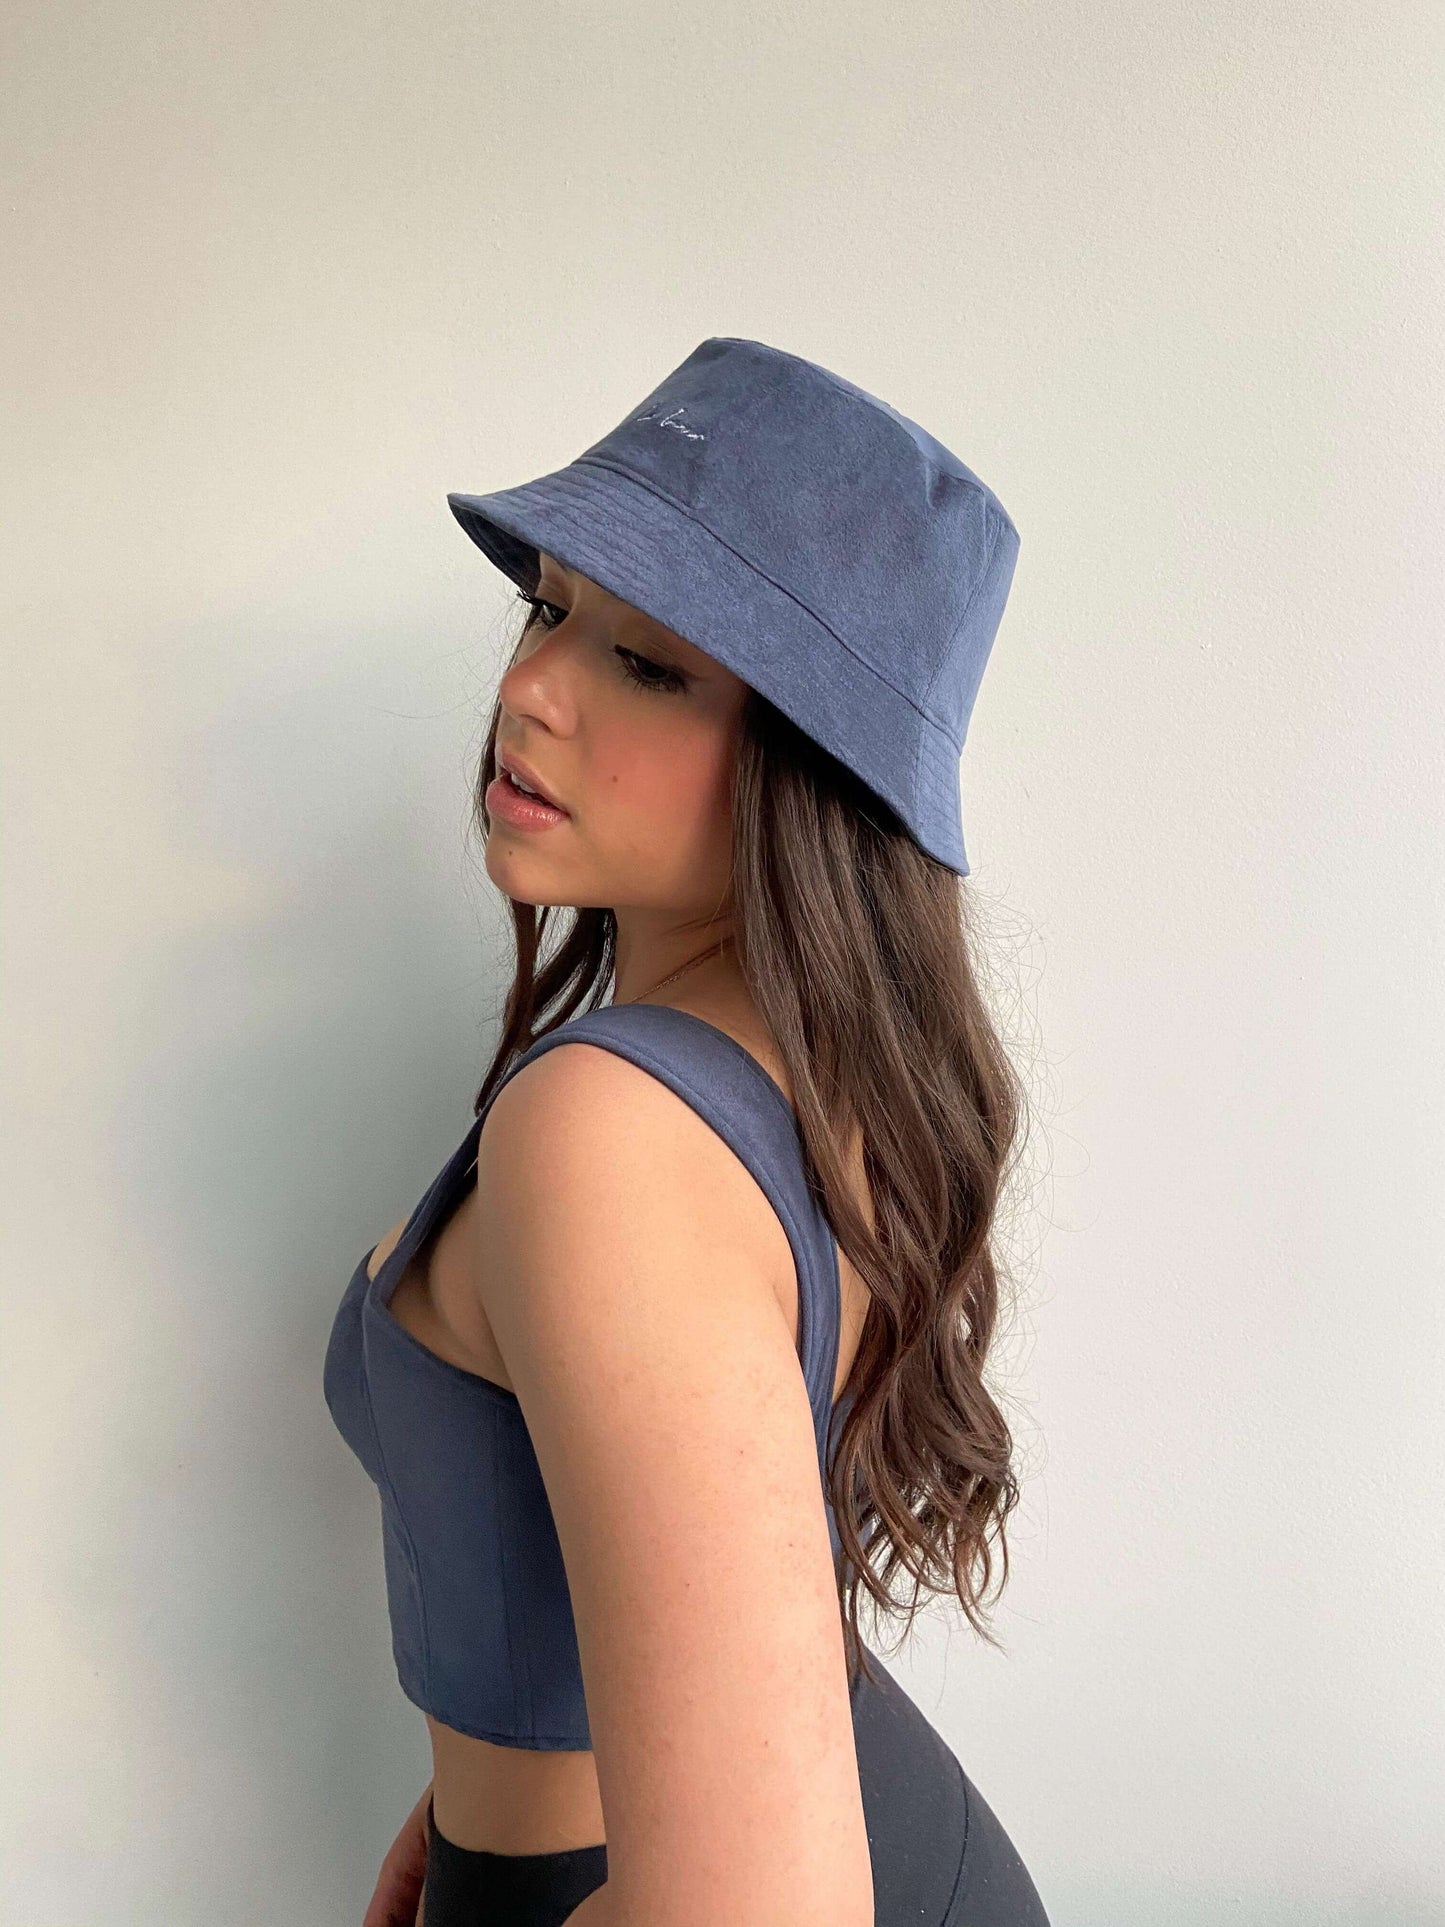 Model 2 wearing Classic Bucket Hat in Blueberry colour with Mimi Bustier in Blueberry colour